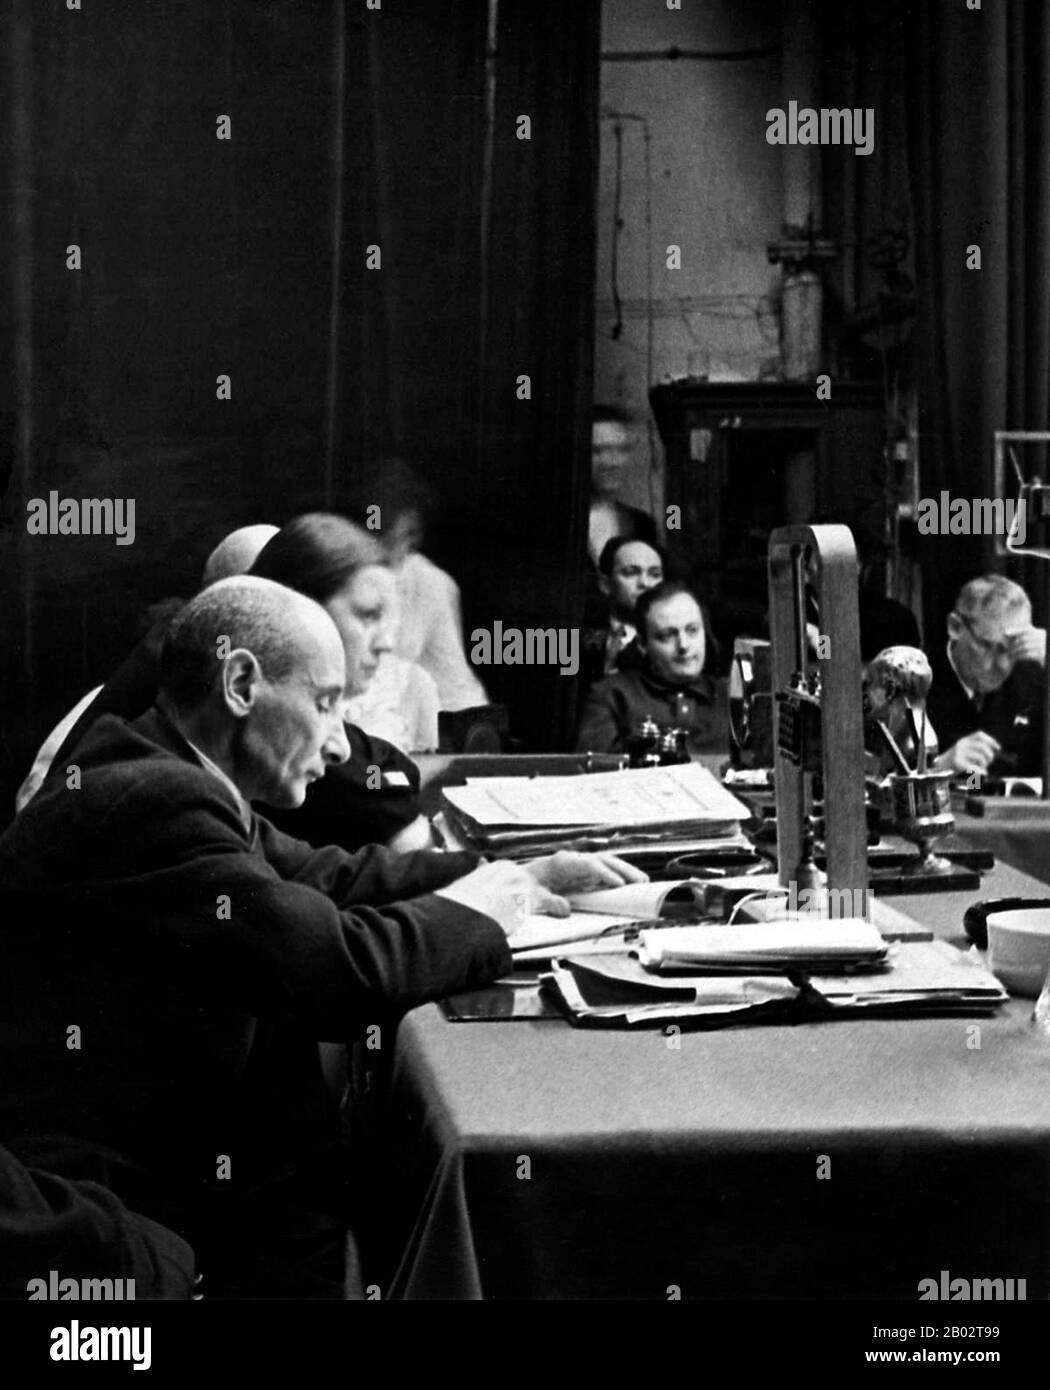 The Moscow Trials were a series of show trials held in the Soviet Union at the instigation of Joseph Stalin between 1936 and 1938. The defendants included most of the surviving Old Bolsheviks, as well as the former leadership of the Soviet secret police.  The Moscow Trials led to the execution of many of the defendants, including most of the surviving Old Bolsheviks. The trials are generally seen as part of Stalin's Great Purge which was an attempt to rid the party of current or prior party oppositionists. Trotskyists were especially targeted, but not exclusively. Indeed any leading Bolshevik Stock Photo